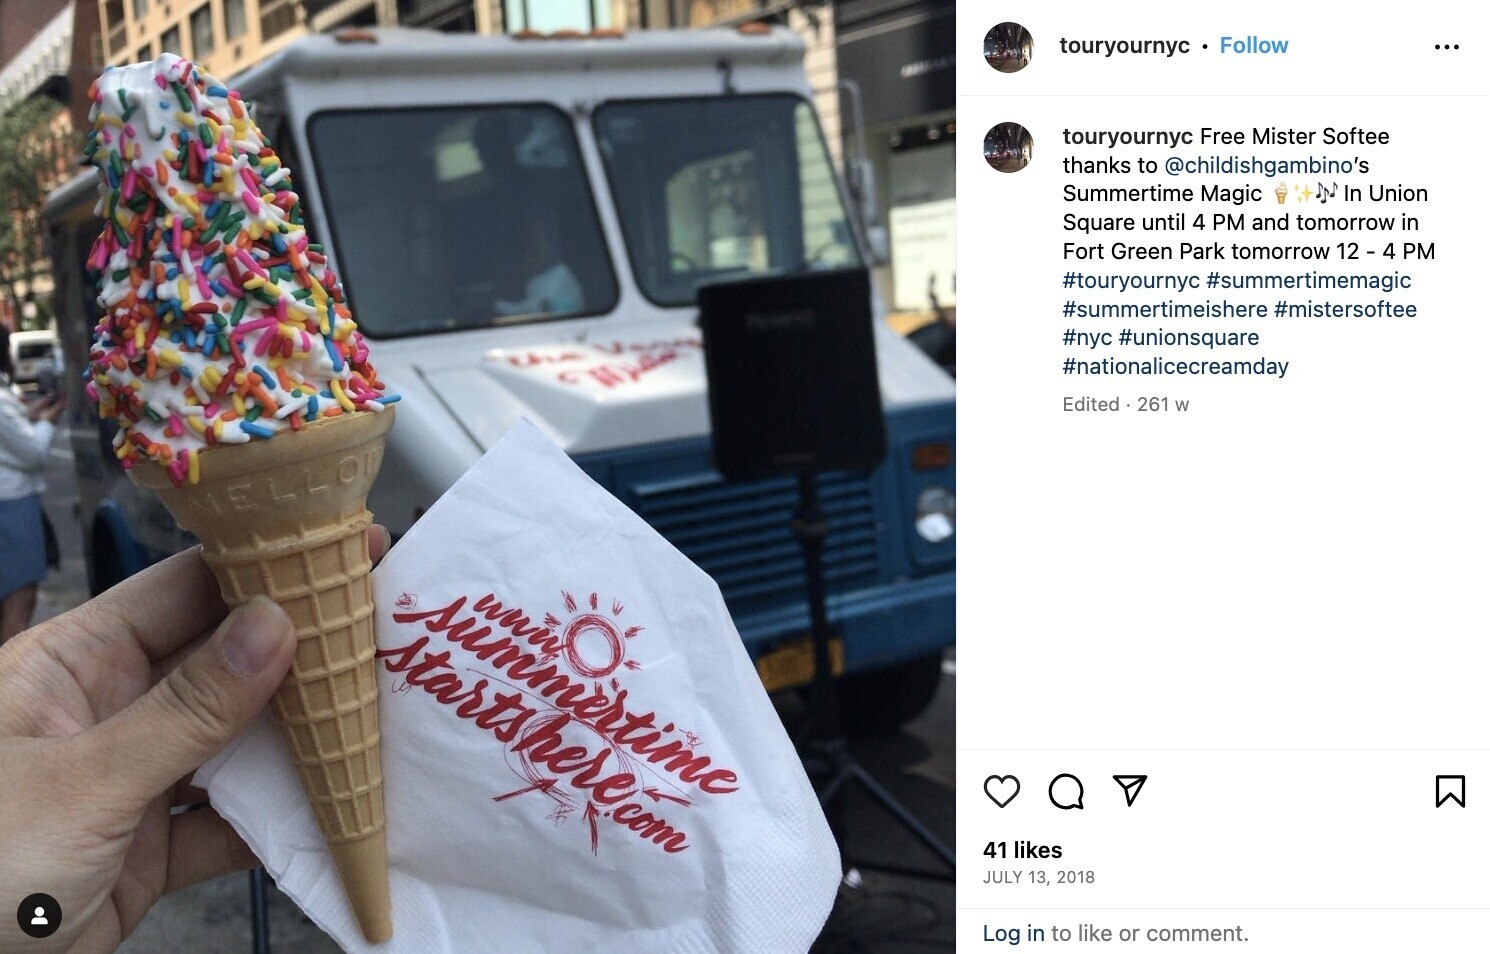 An Instagram post of “Summertime Magic” with ice cream